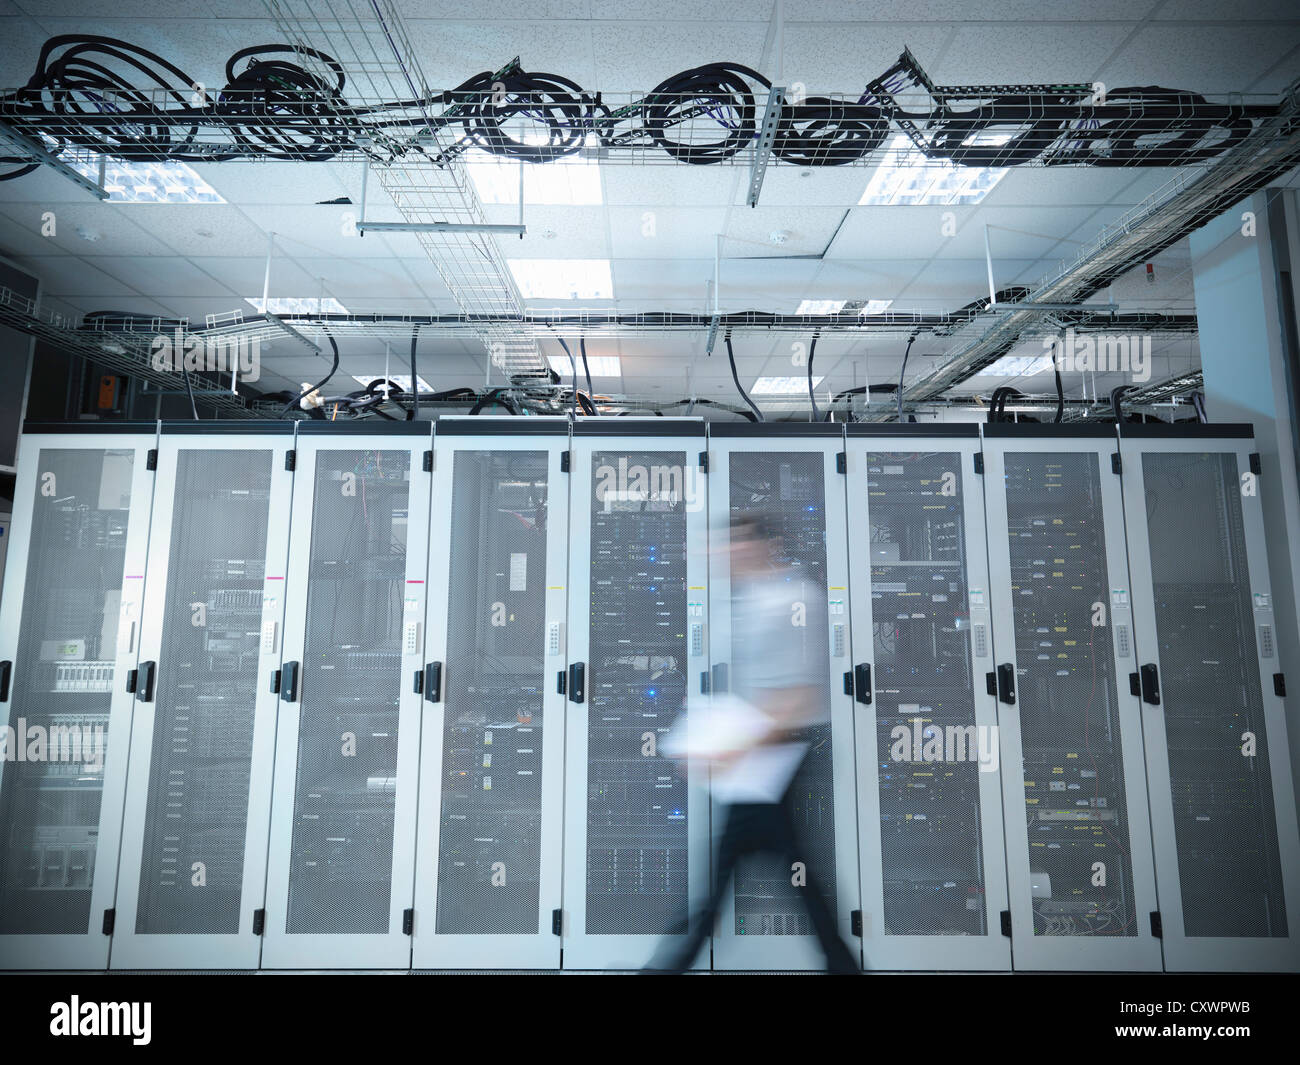 Blurred view of man in server room Banque D'Images